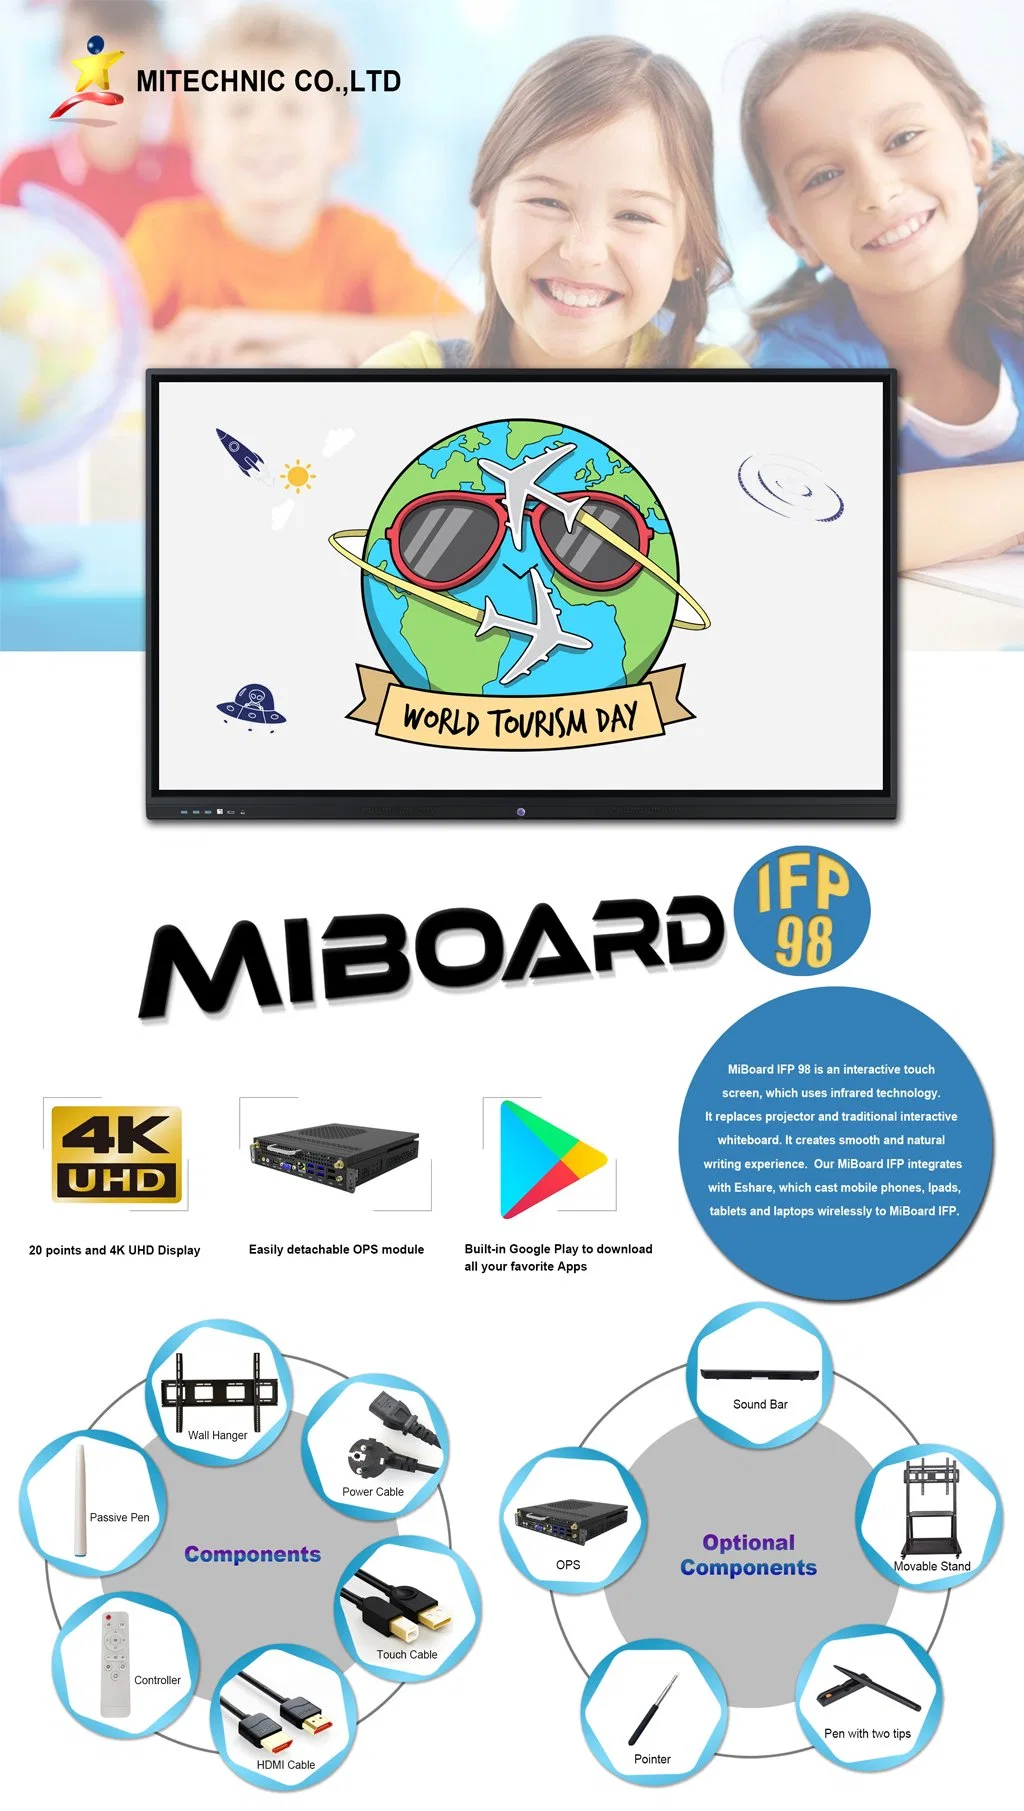 Large Infrared LED Touch Computer Touch Interactive Flat Panel Board Miboard Android Conference Meeting Whiteboard Display LCD Screen Ifp 98&prime; &prime;